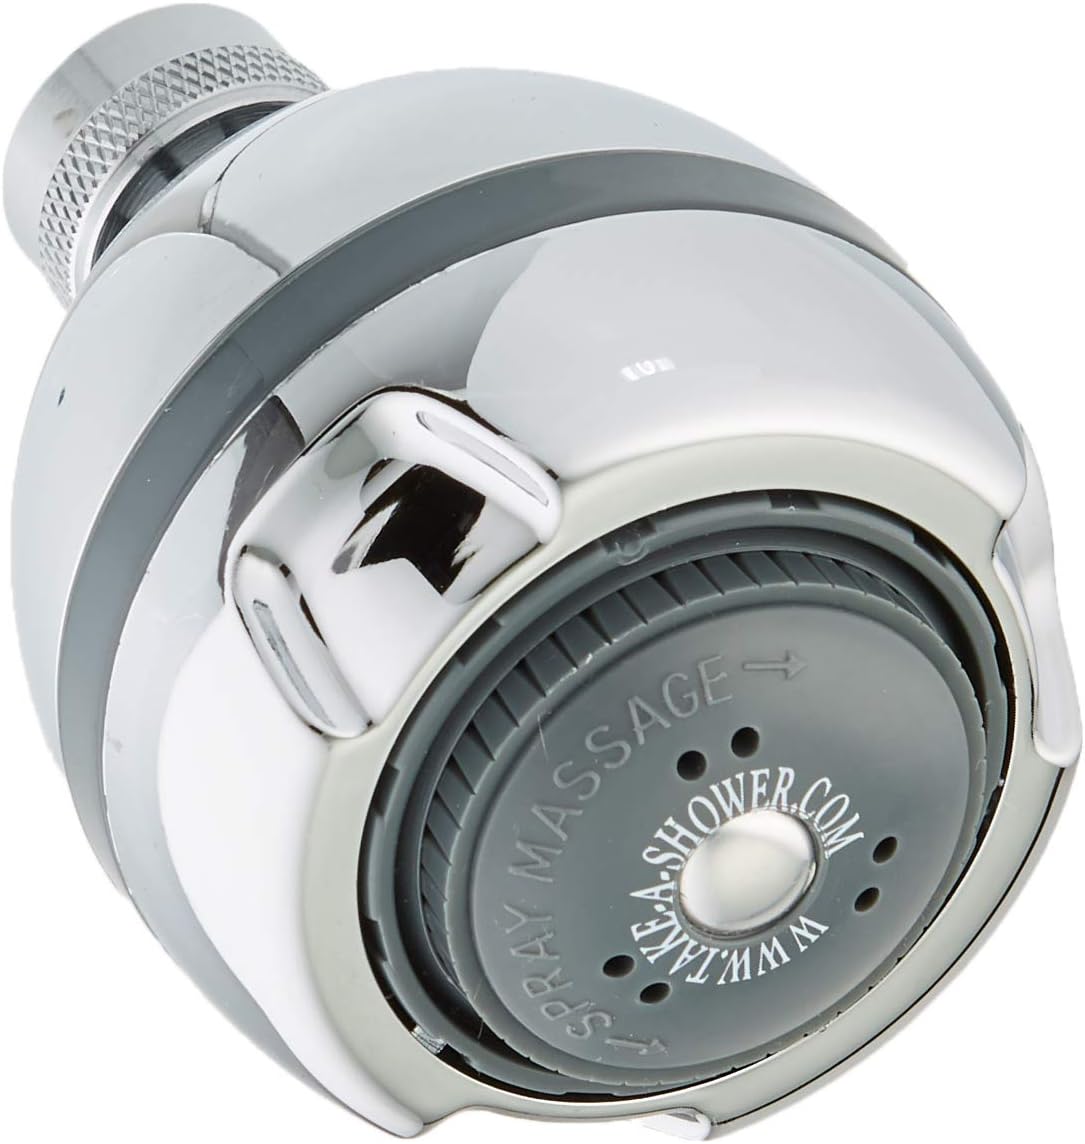 Best Shower Head for Low Water Pressure - The Original [...]